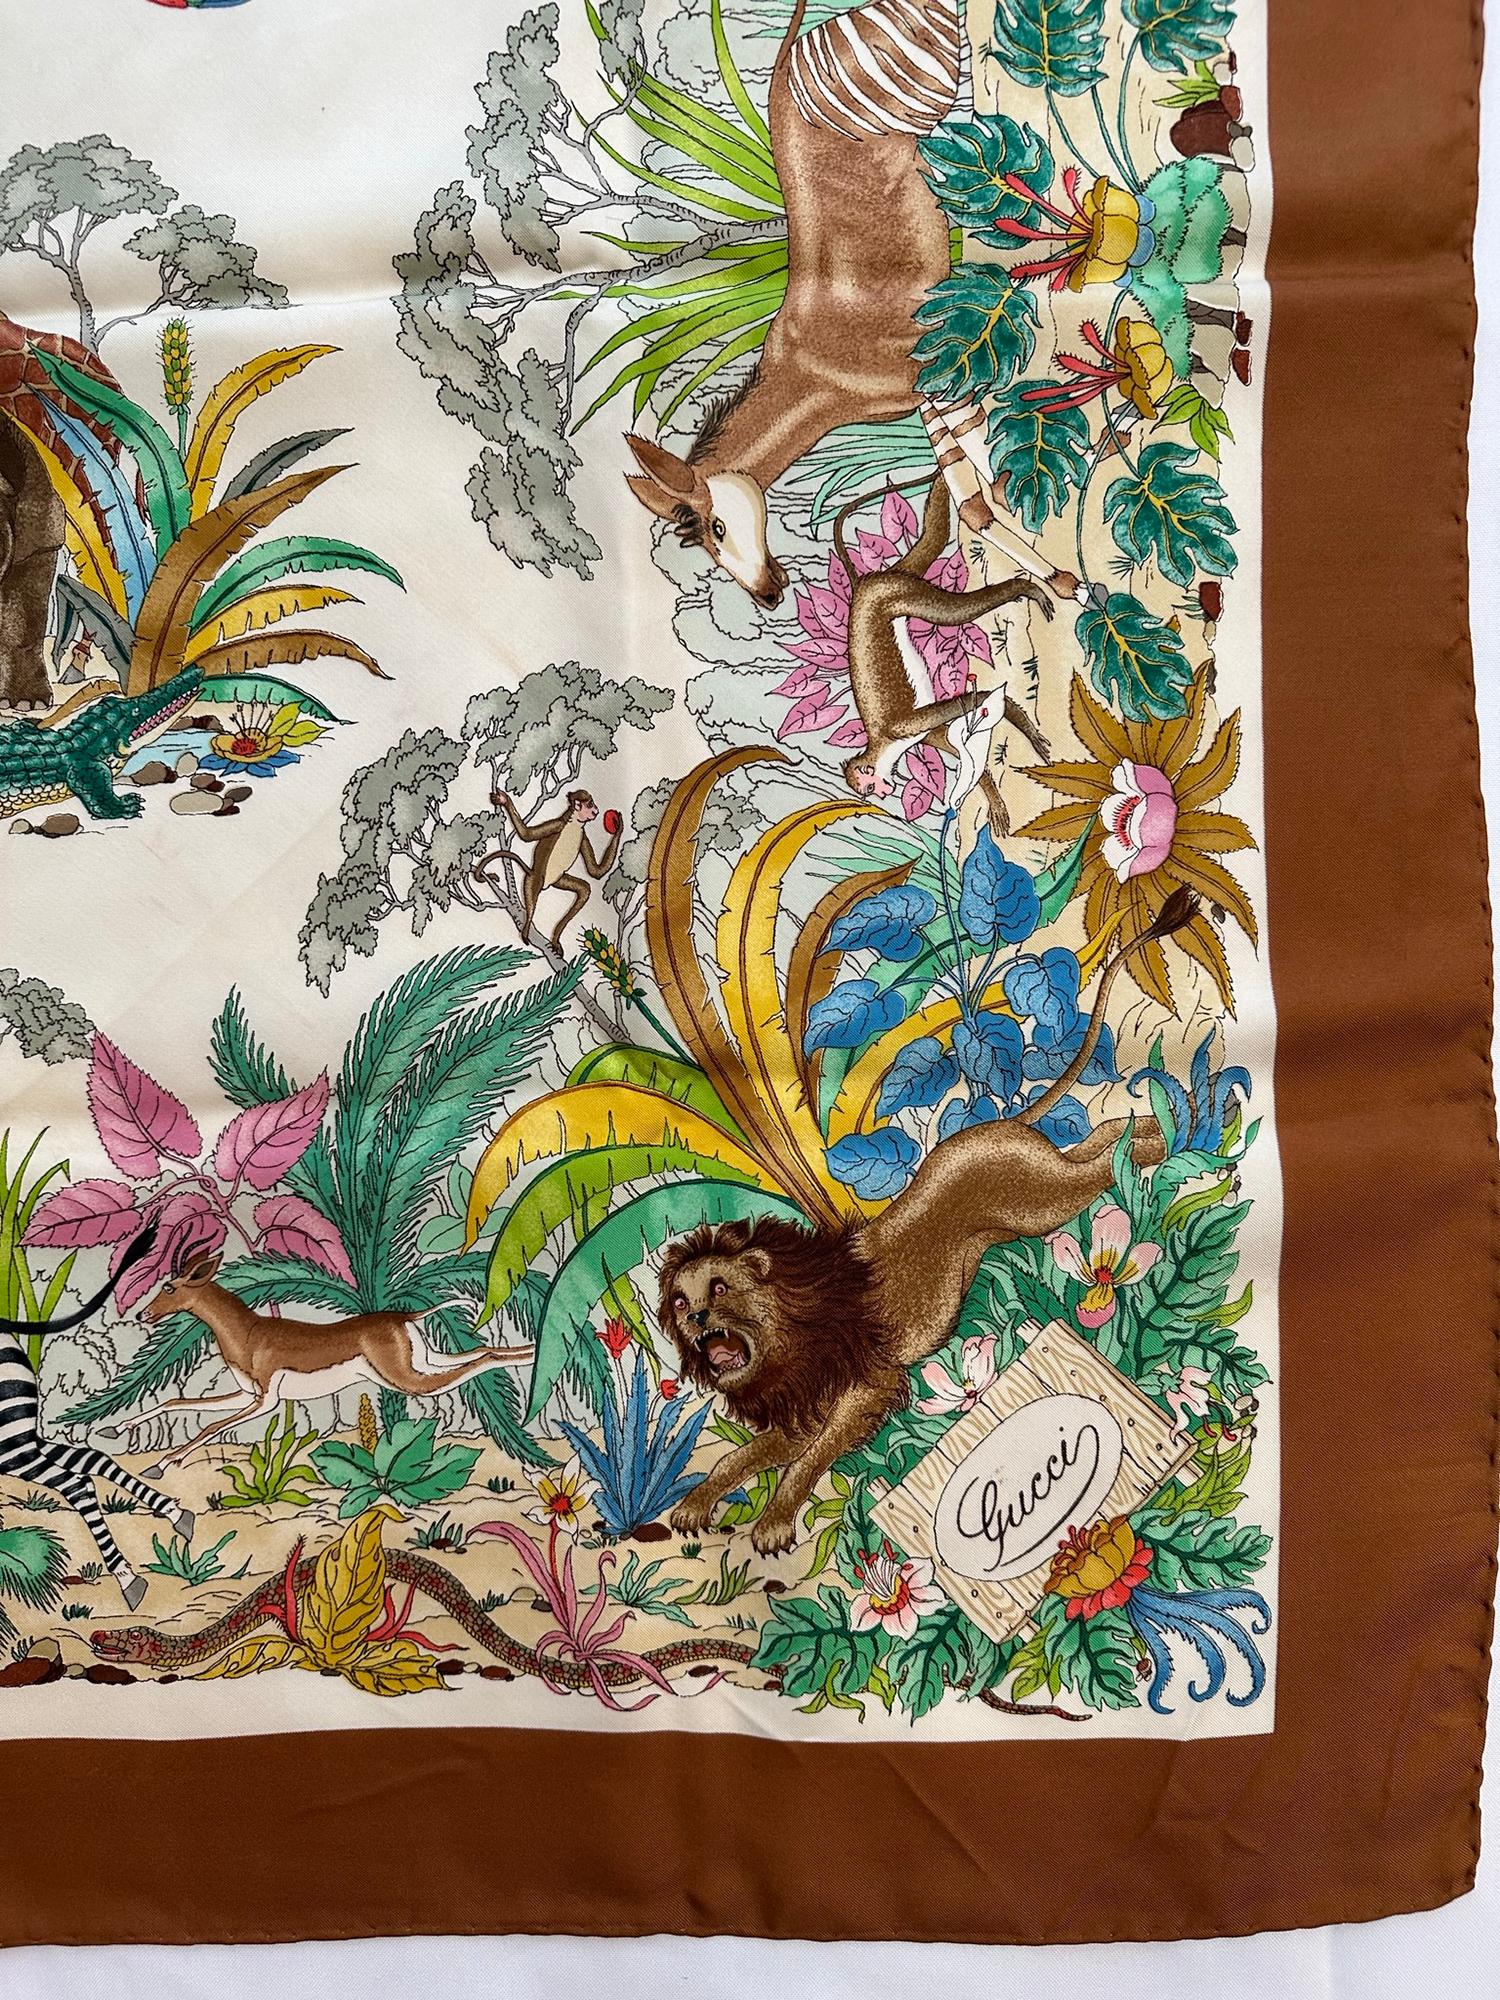 Gucci colourful vintage, The jungle, silk scarf designed by Vittorio Accornero in the 1969. This version is especially gorgeous because of the colourway, the border a dark reddish brown make the assorted flora & fauna + the creatures really pop!